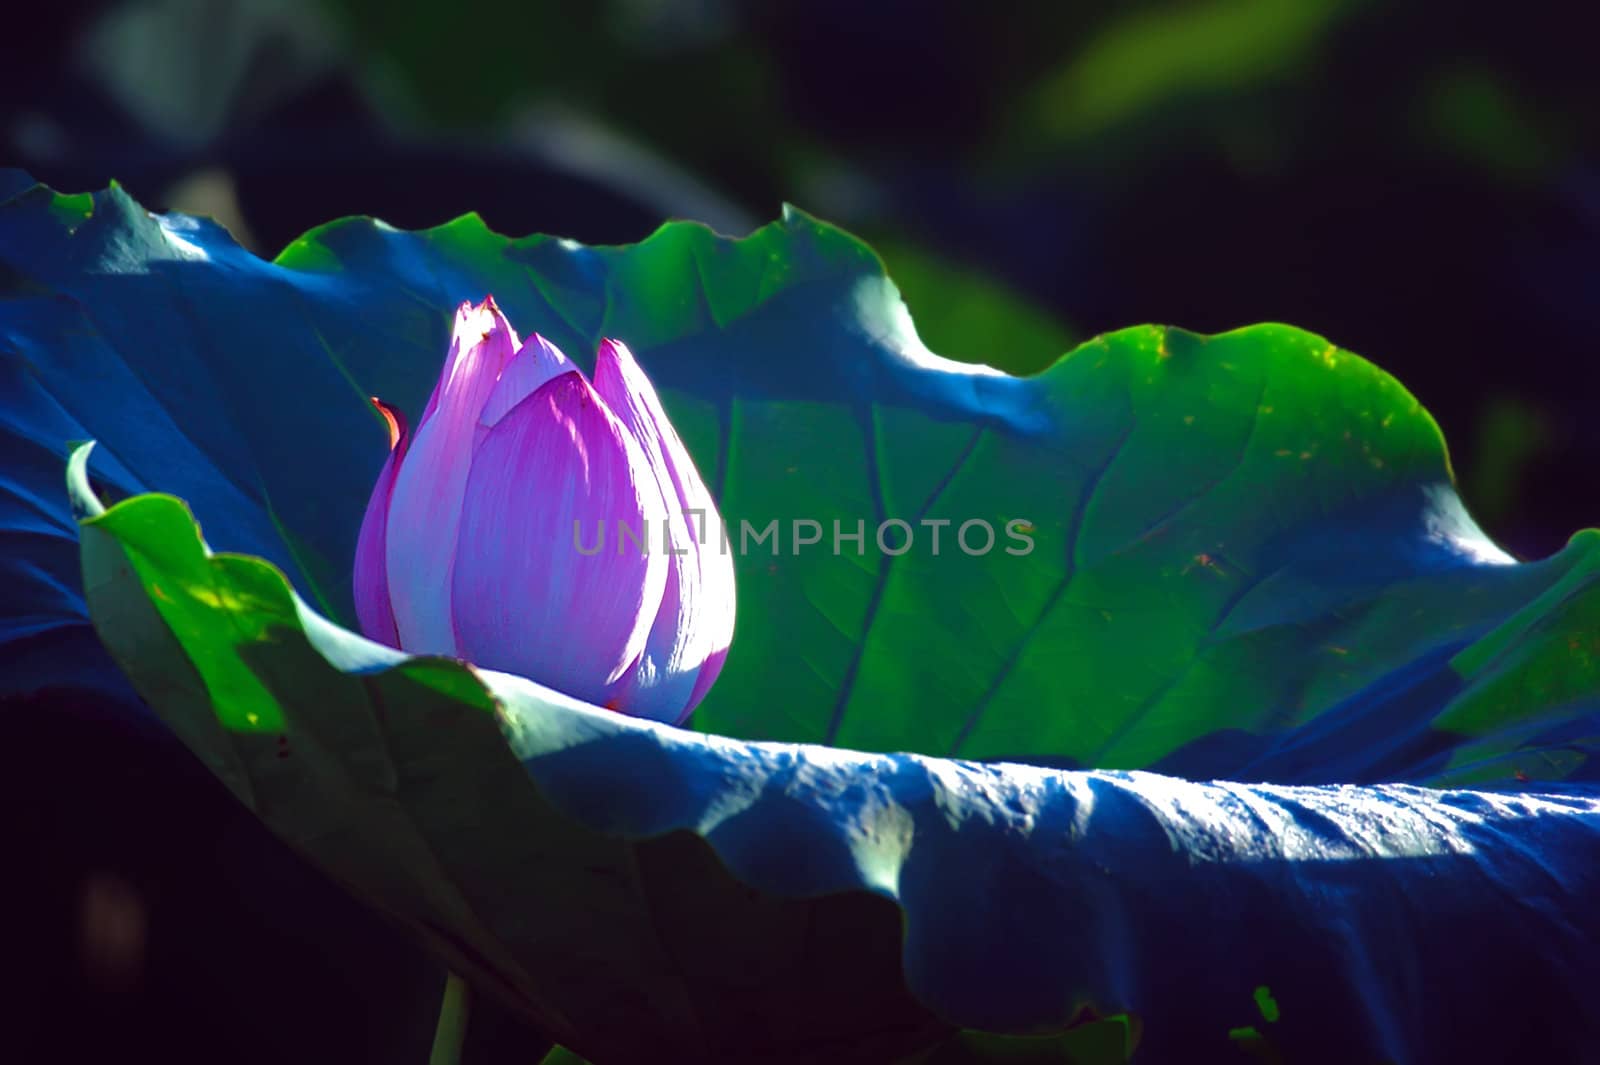 Lotus flower by xfdly5